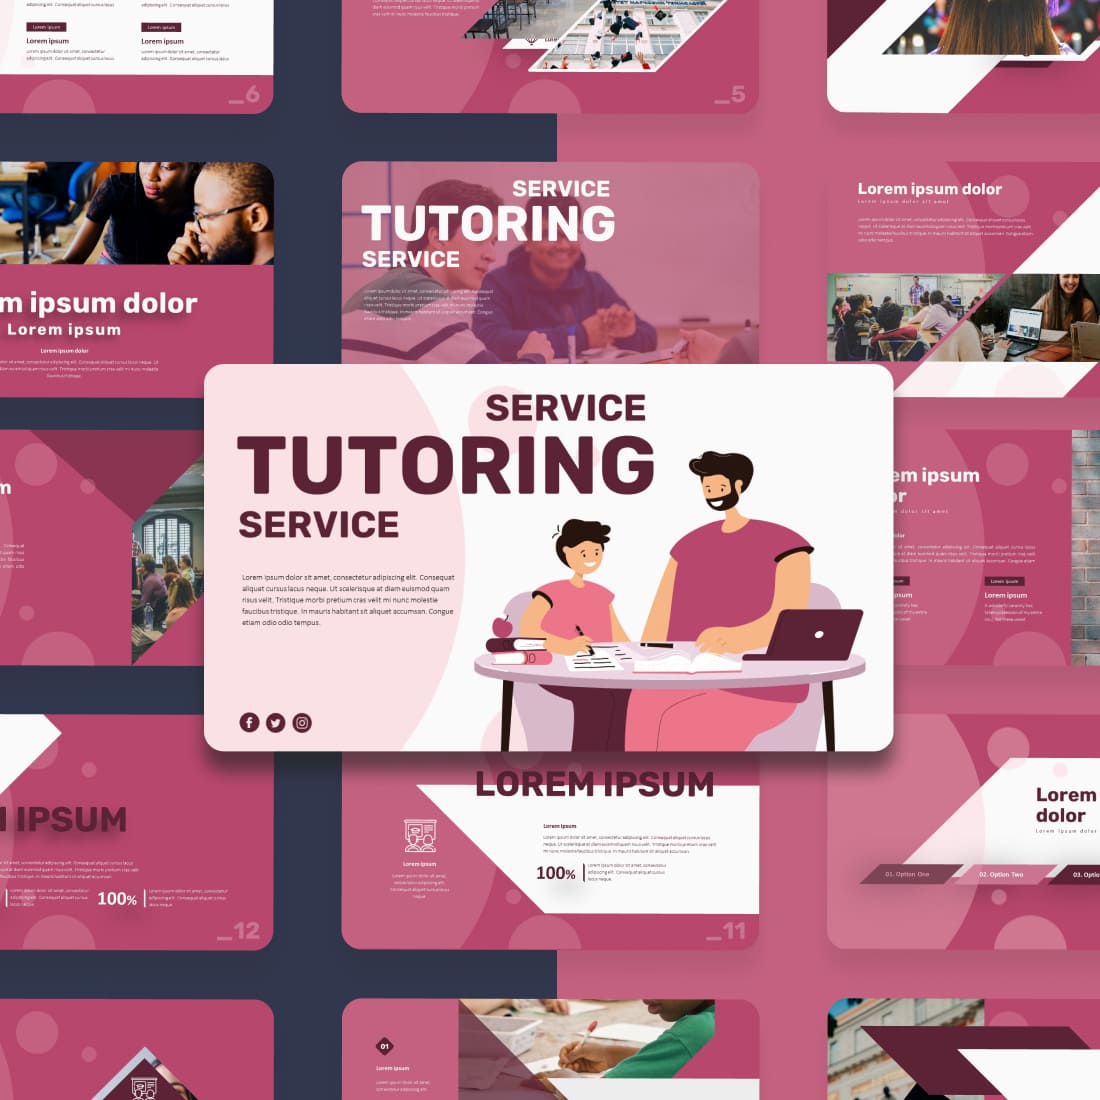 Tutoring Service Powerpoint Template: 50 Slides cover.